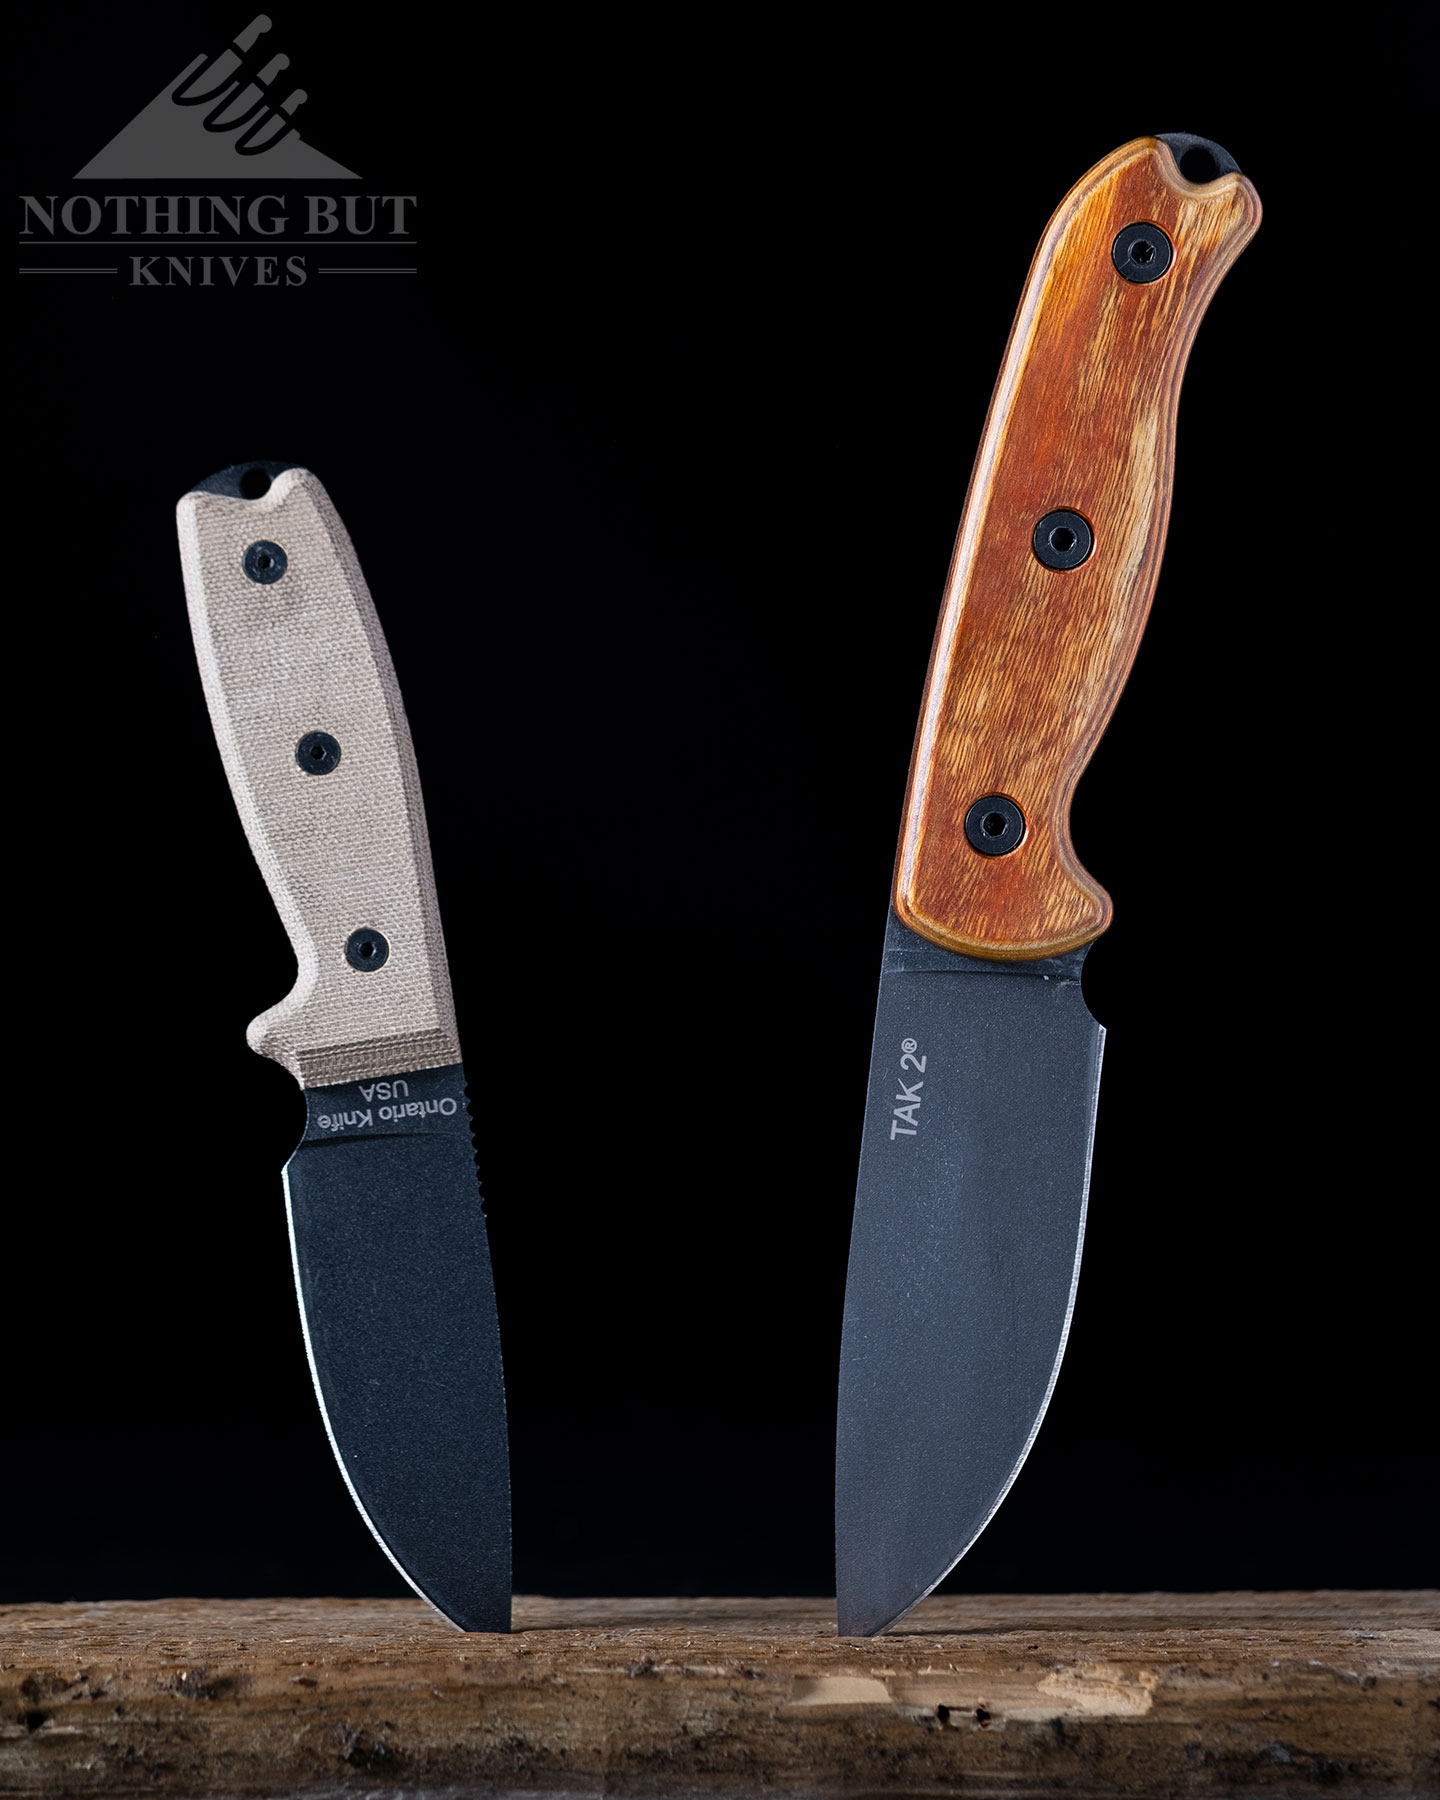 Both the OKC Rat 3 and TAK 2 fixed blade knives pictured here are USA made.